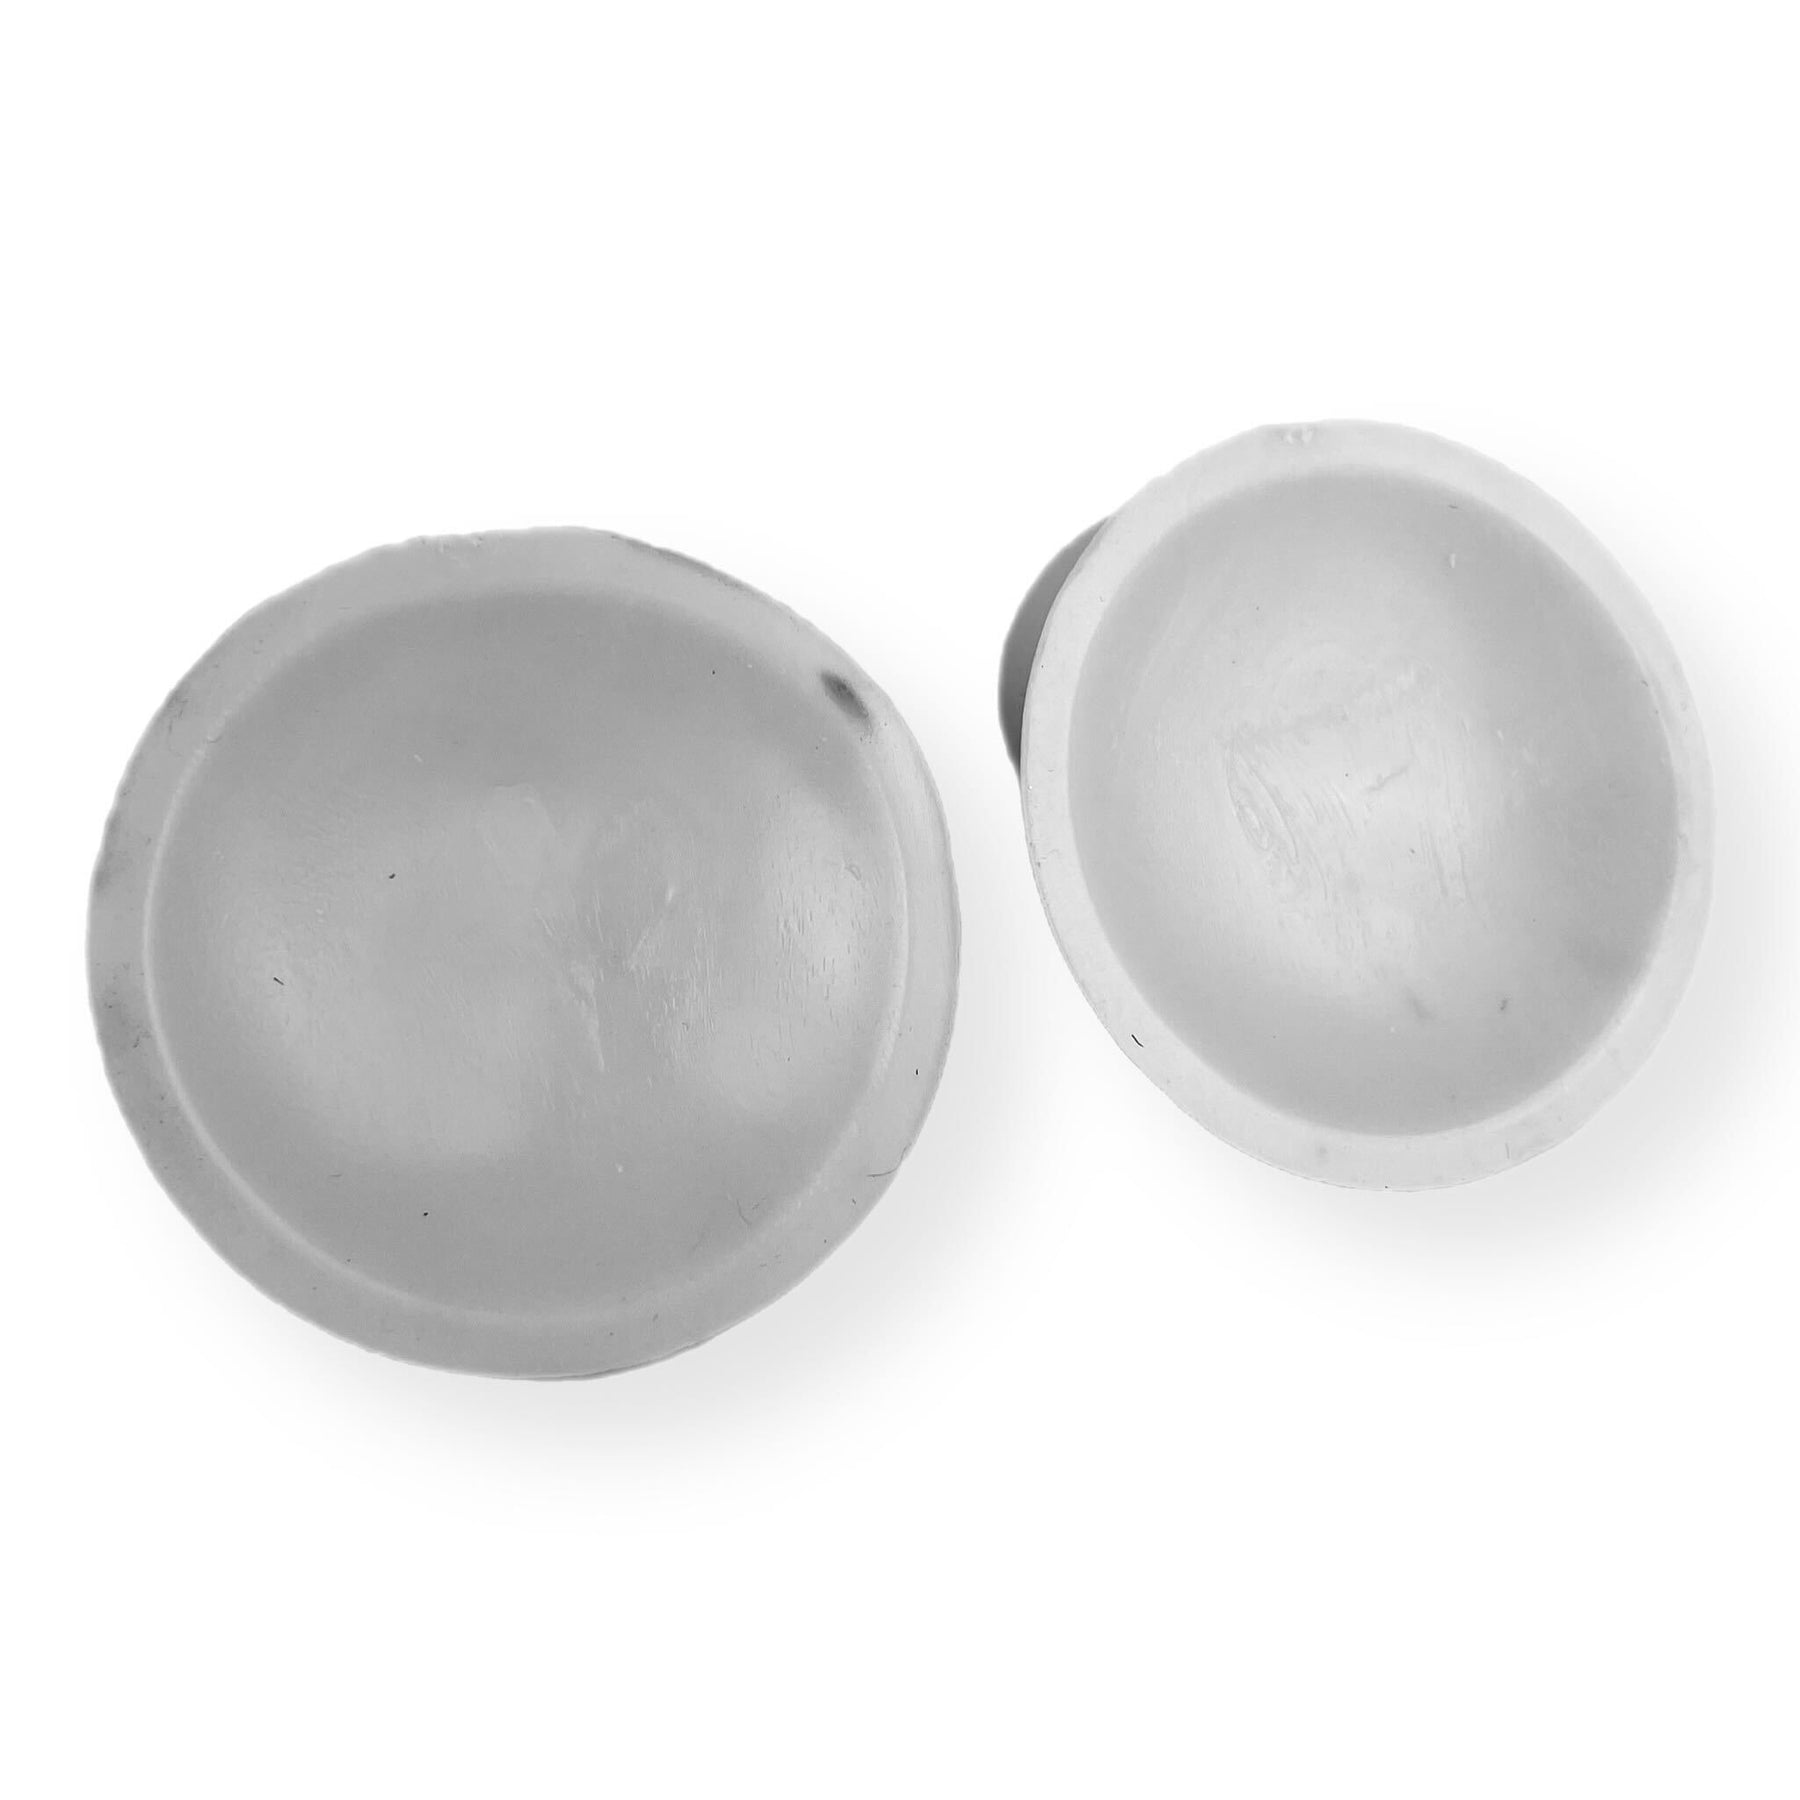 Front Carrier Replacement Rubber Cup/Buffer - 16mm - Pair - White